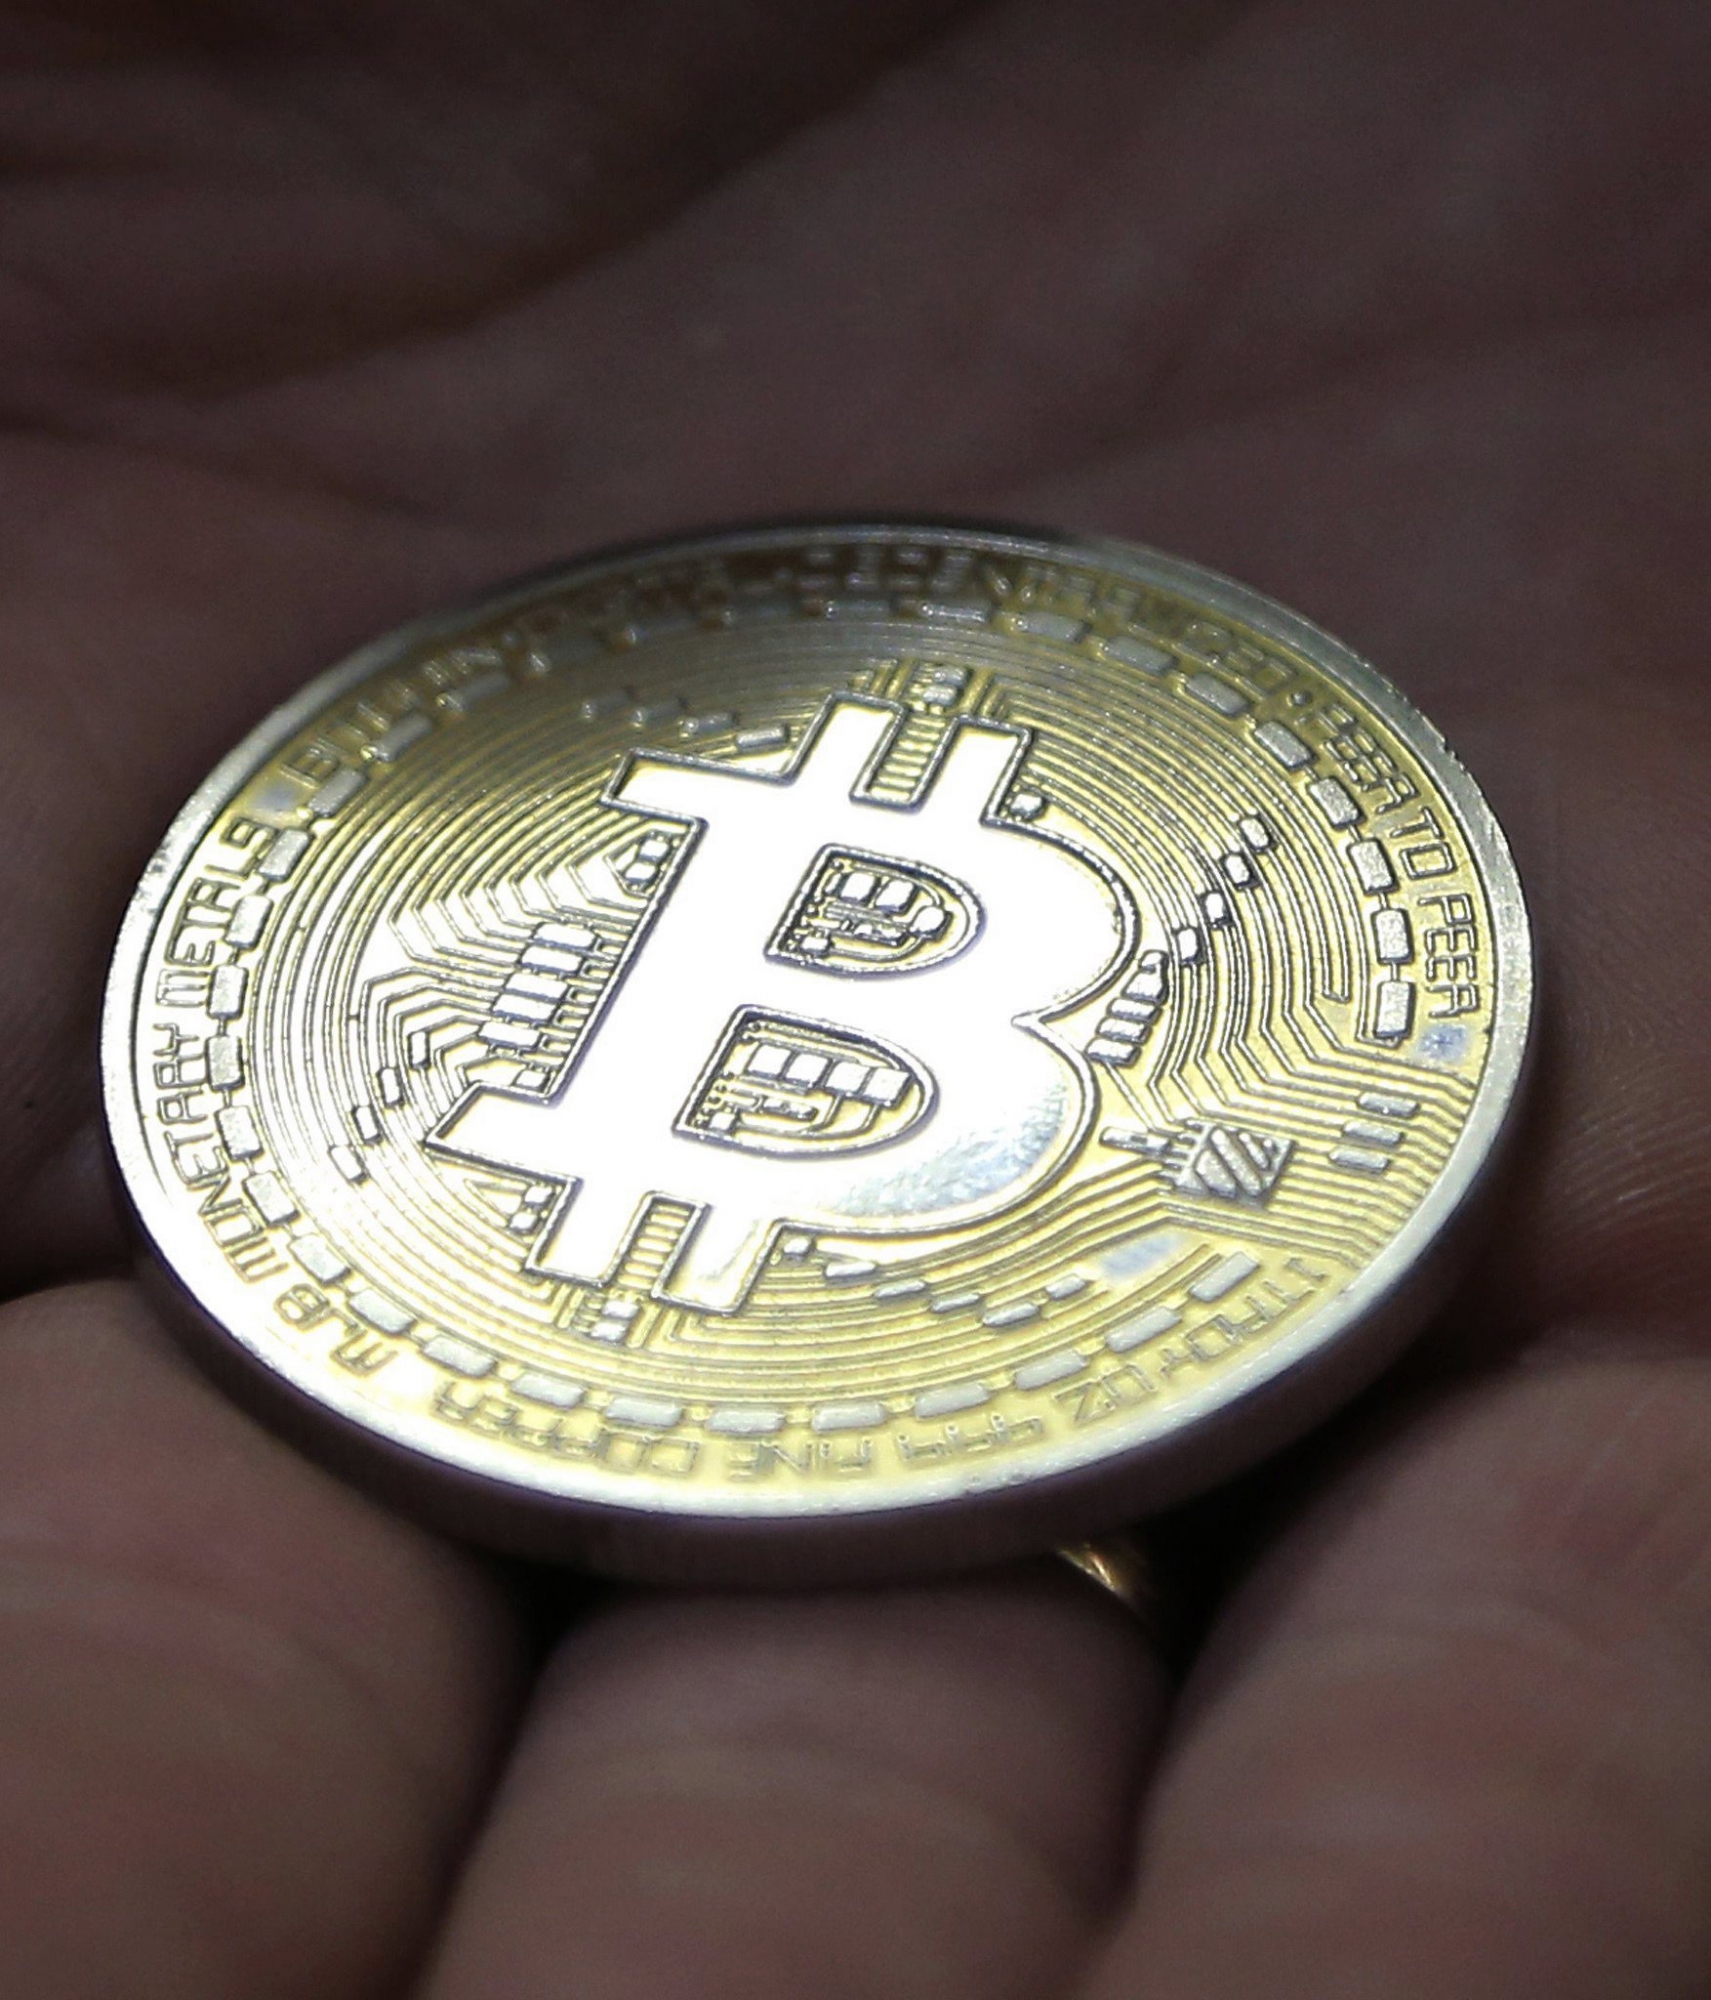 epa06375828 (FILE) - A visitor holds a Bitcoin (virtual currency) souvenir coin, during a webinar by Russian businessman, Orthodox activist and founder the Crypto exchange CryptoSterlingClub Alisa, German Sterligov at the main office of CryptoSterlingClub Alisa in Moscow, Russia, 29 August 2017. Media reports on 08 December 2017 state that the value of teh Bitcoin currency peaked over 17,000 US dollars in trading in Asia.  EPA/MAXIM SHIPENKOV (FILE) RUSSIA BITCOIN TRADING